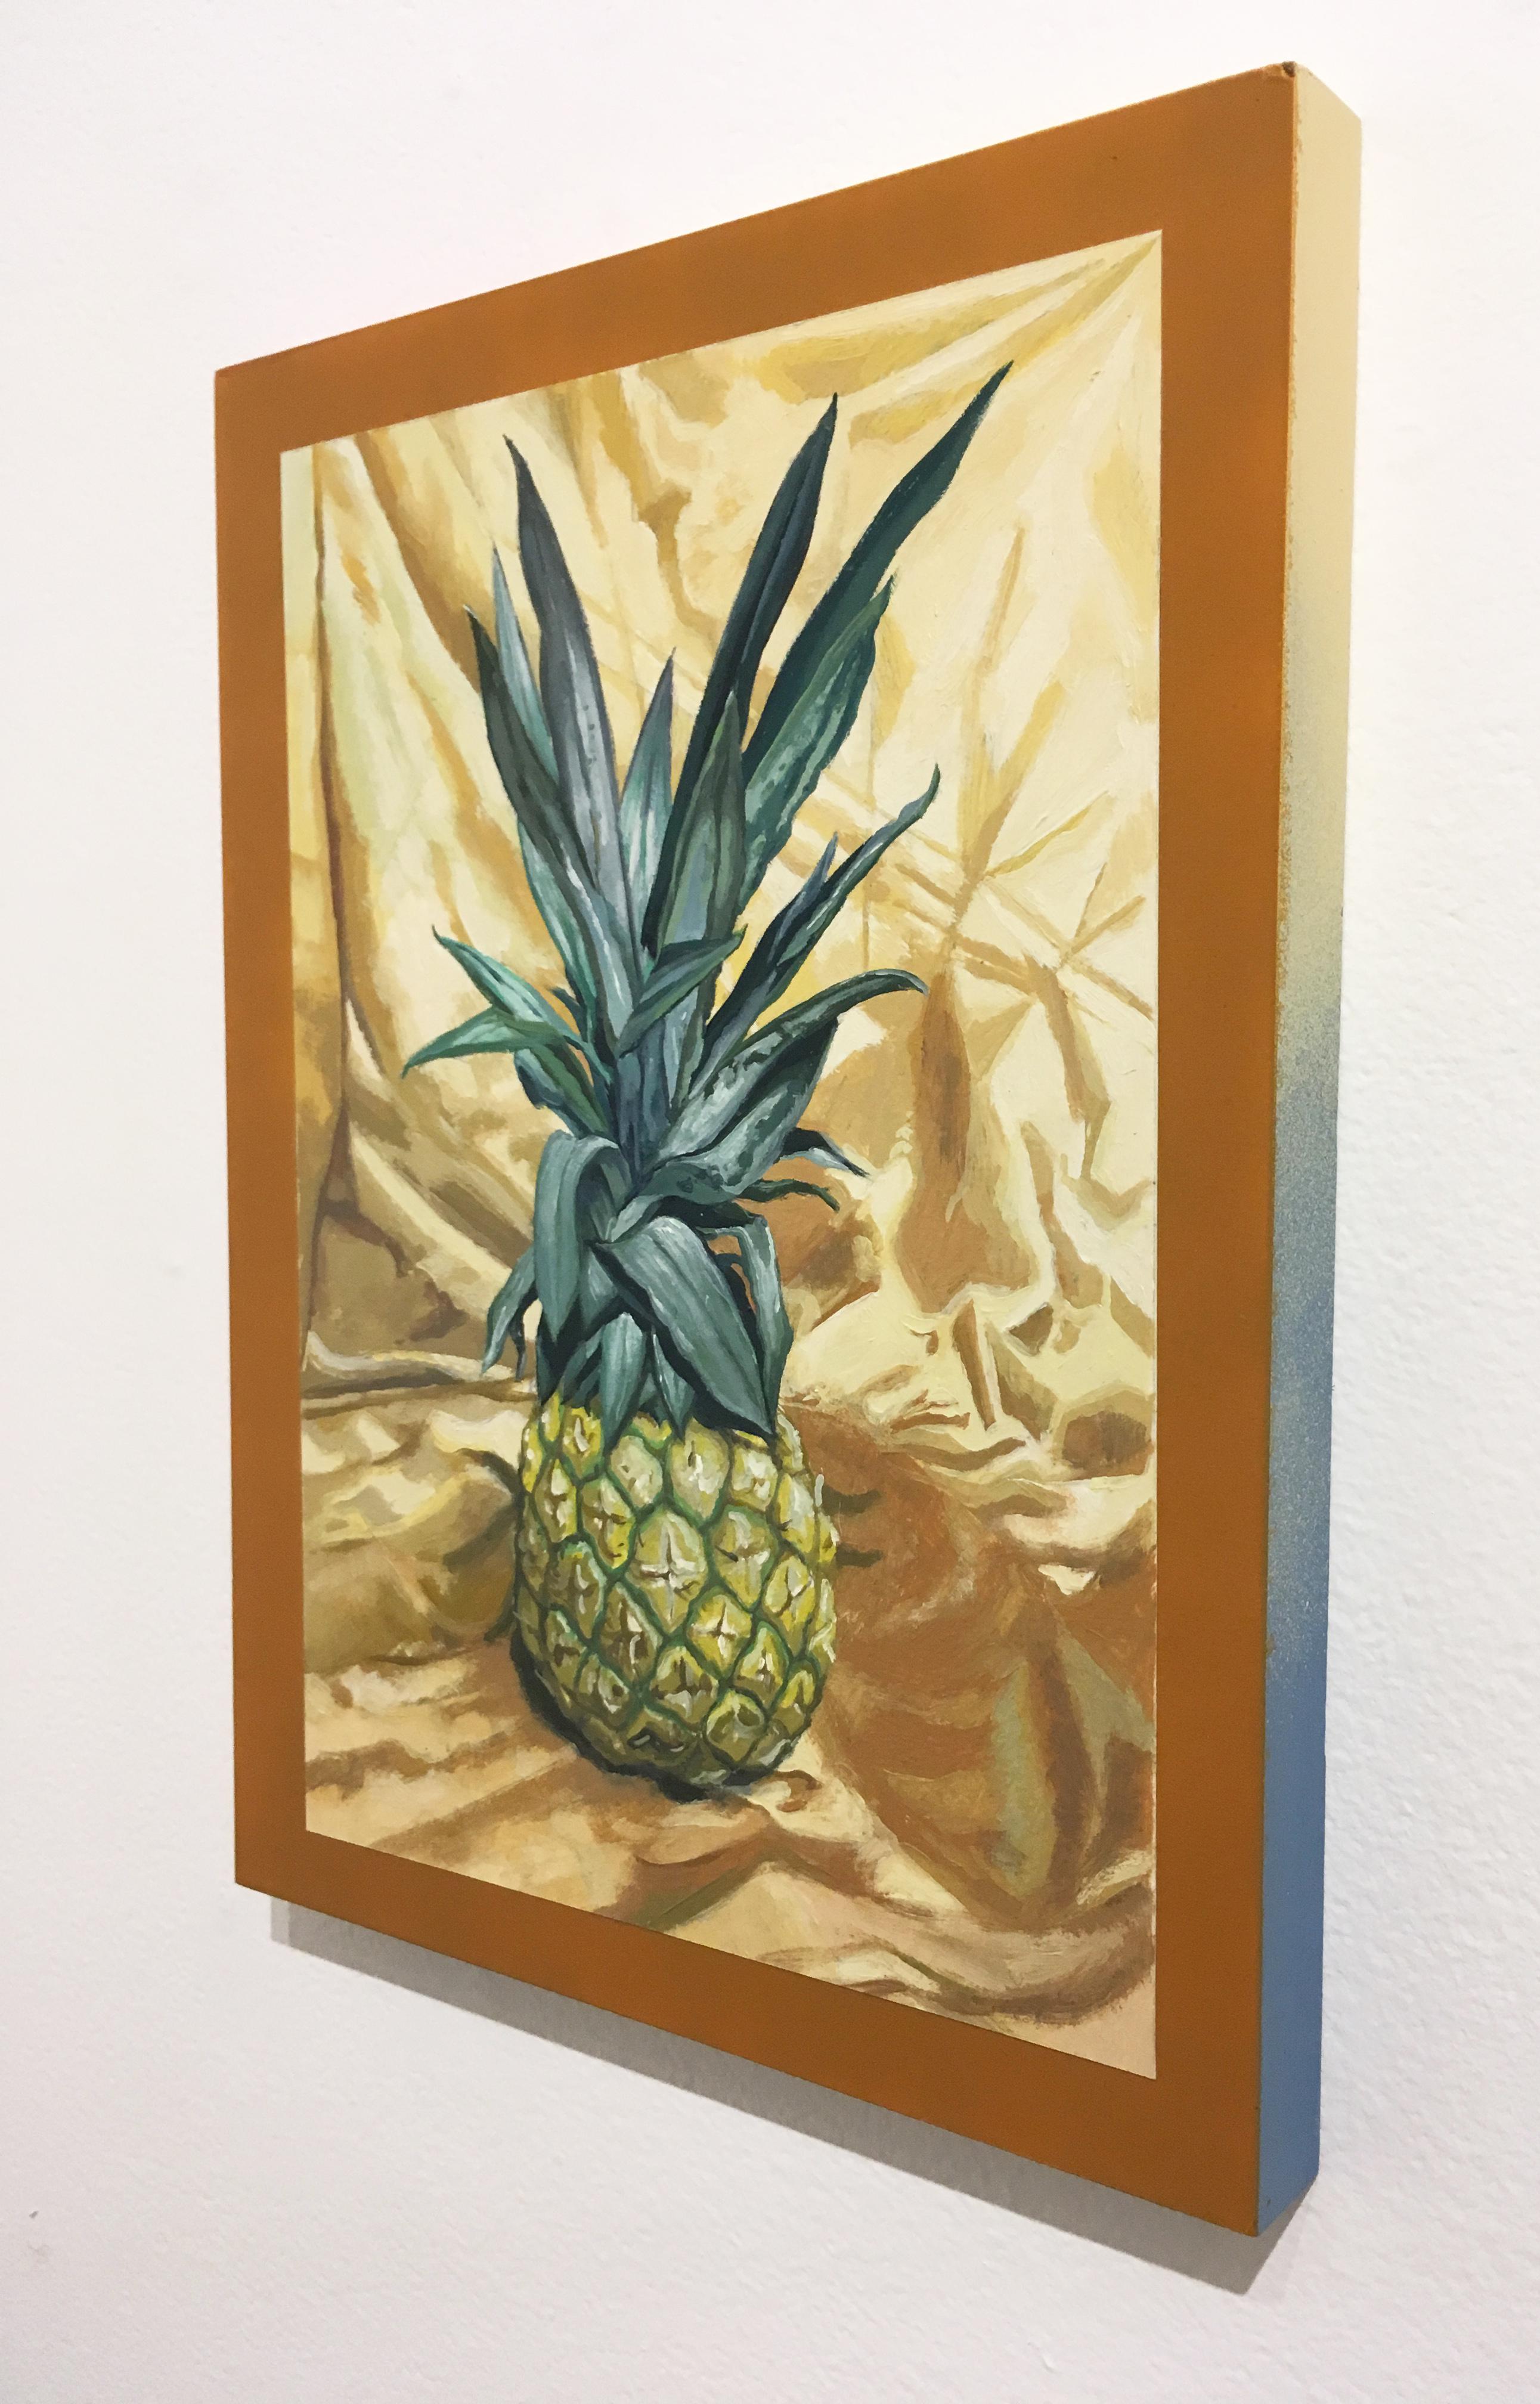 Colonial Luxury (2019) LNY pineapple fruit still life oil painting paper on wood - Painting by Layqa Nuna Yawar